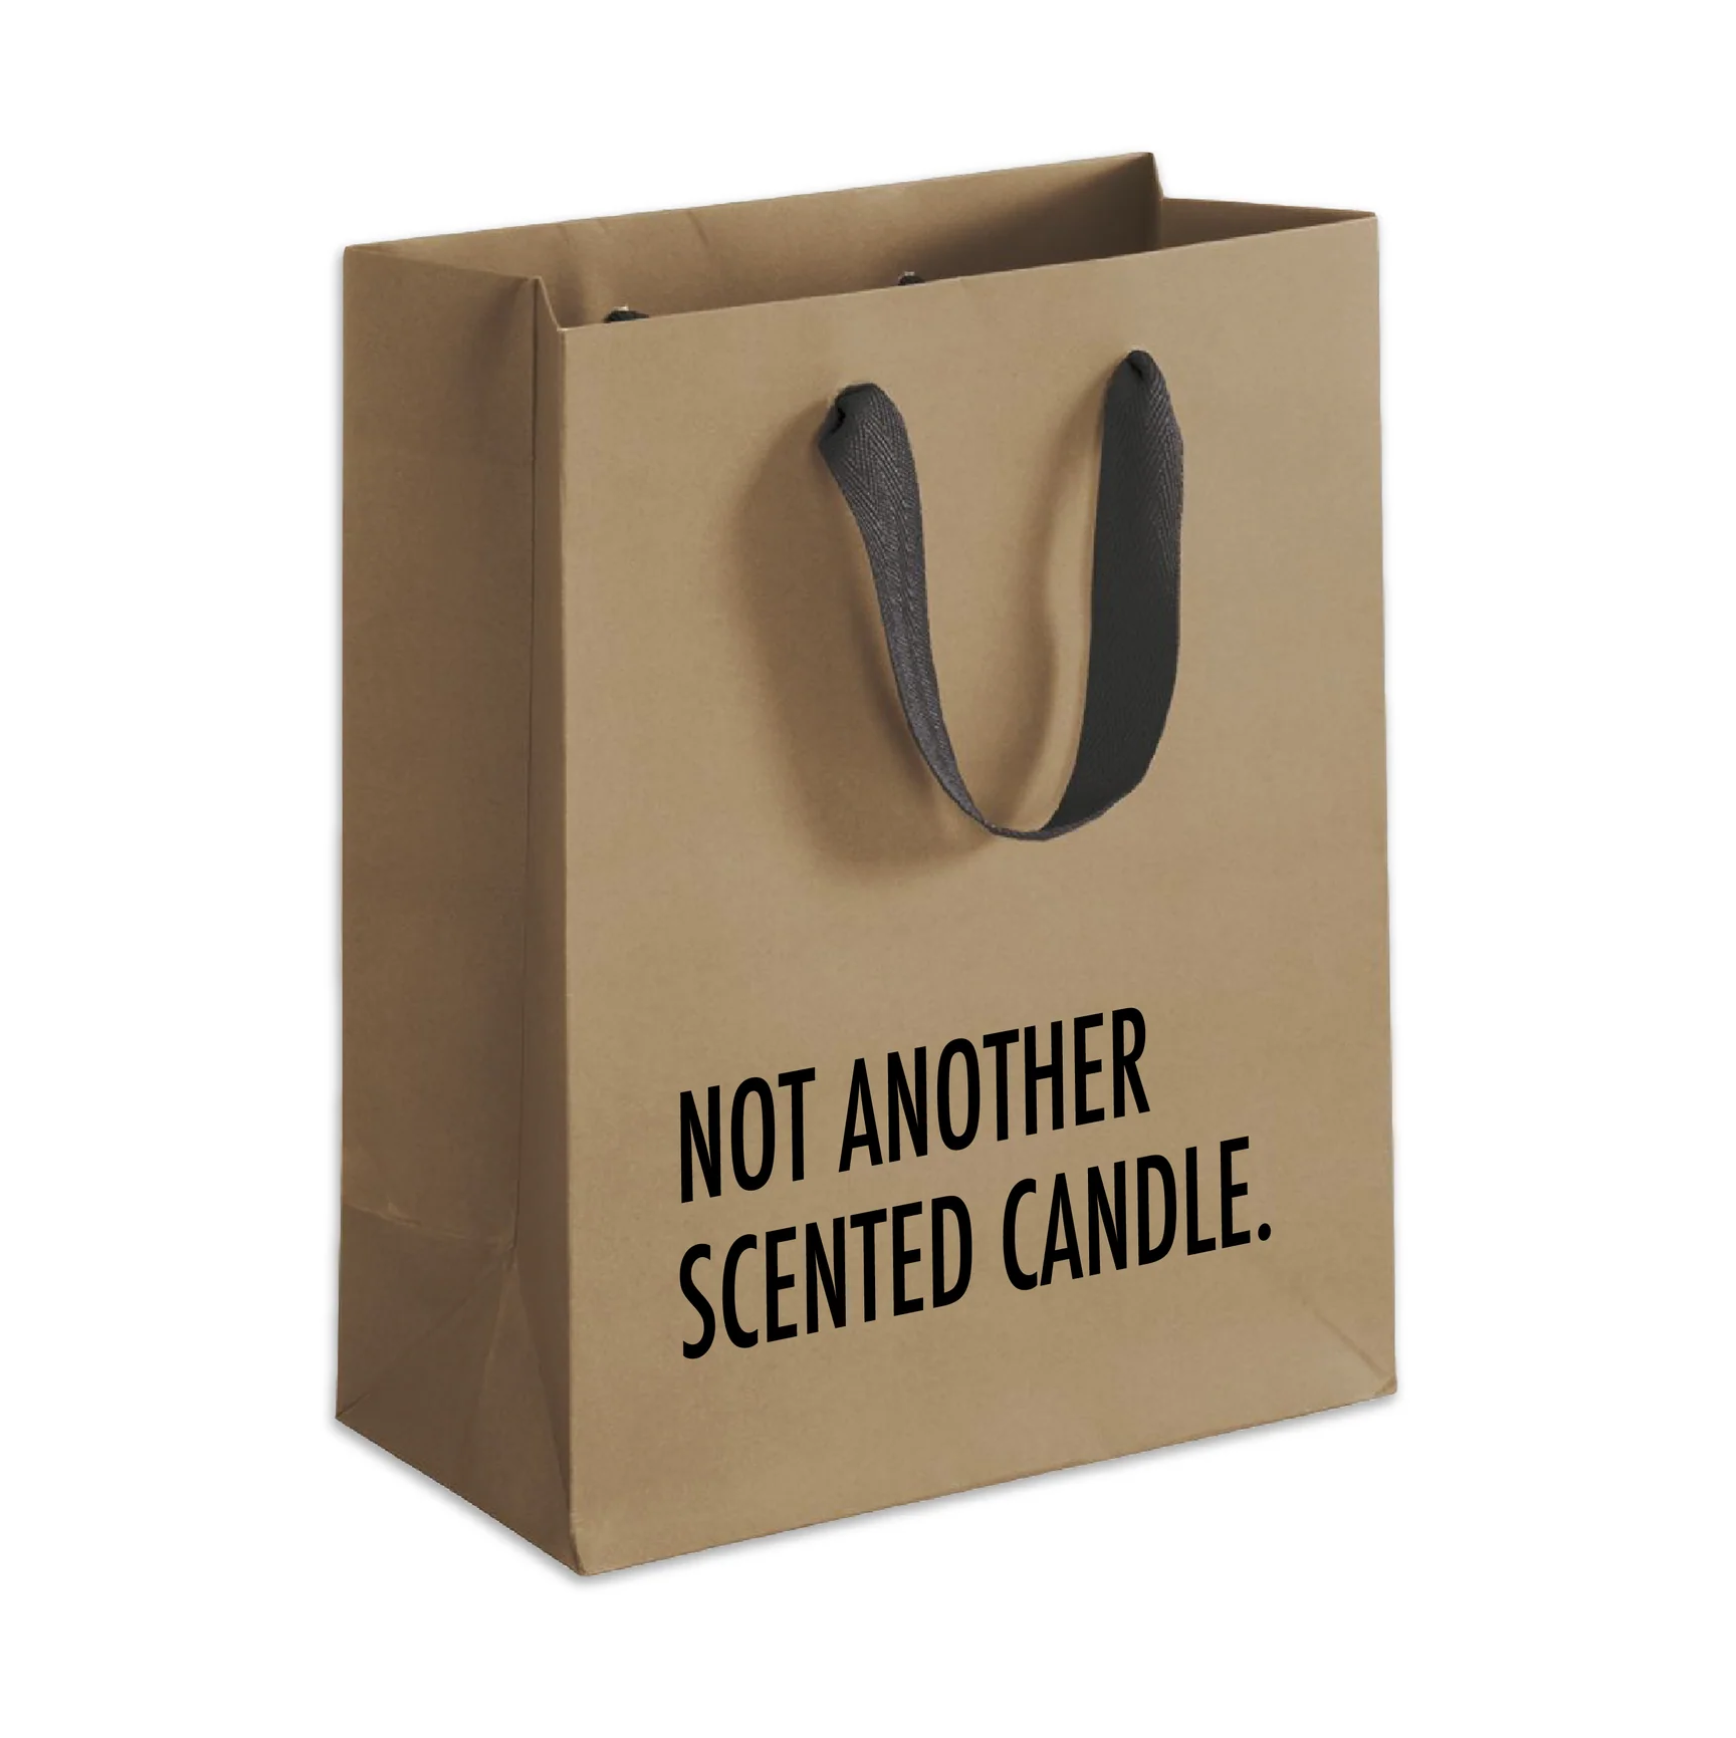 Pretty Alright Goods - Not Another Scented Candle